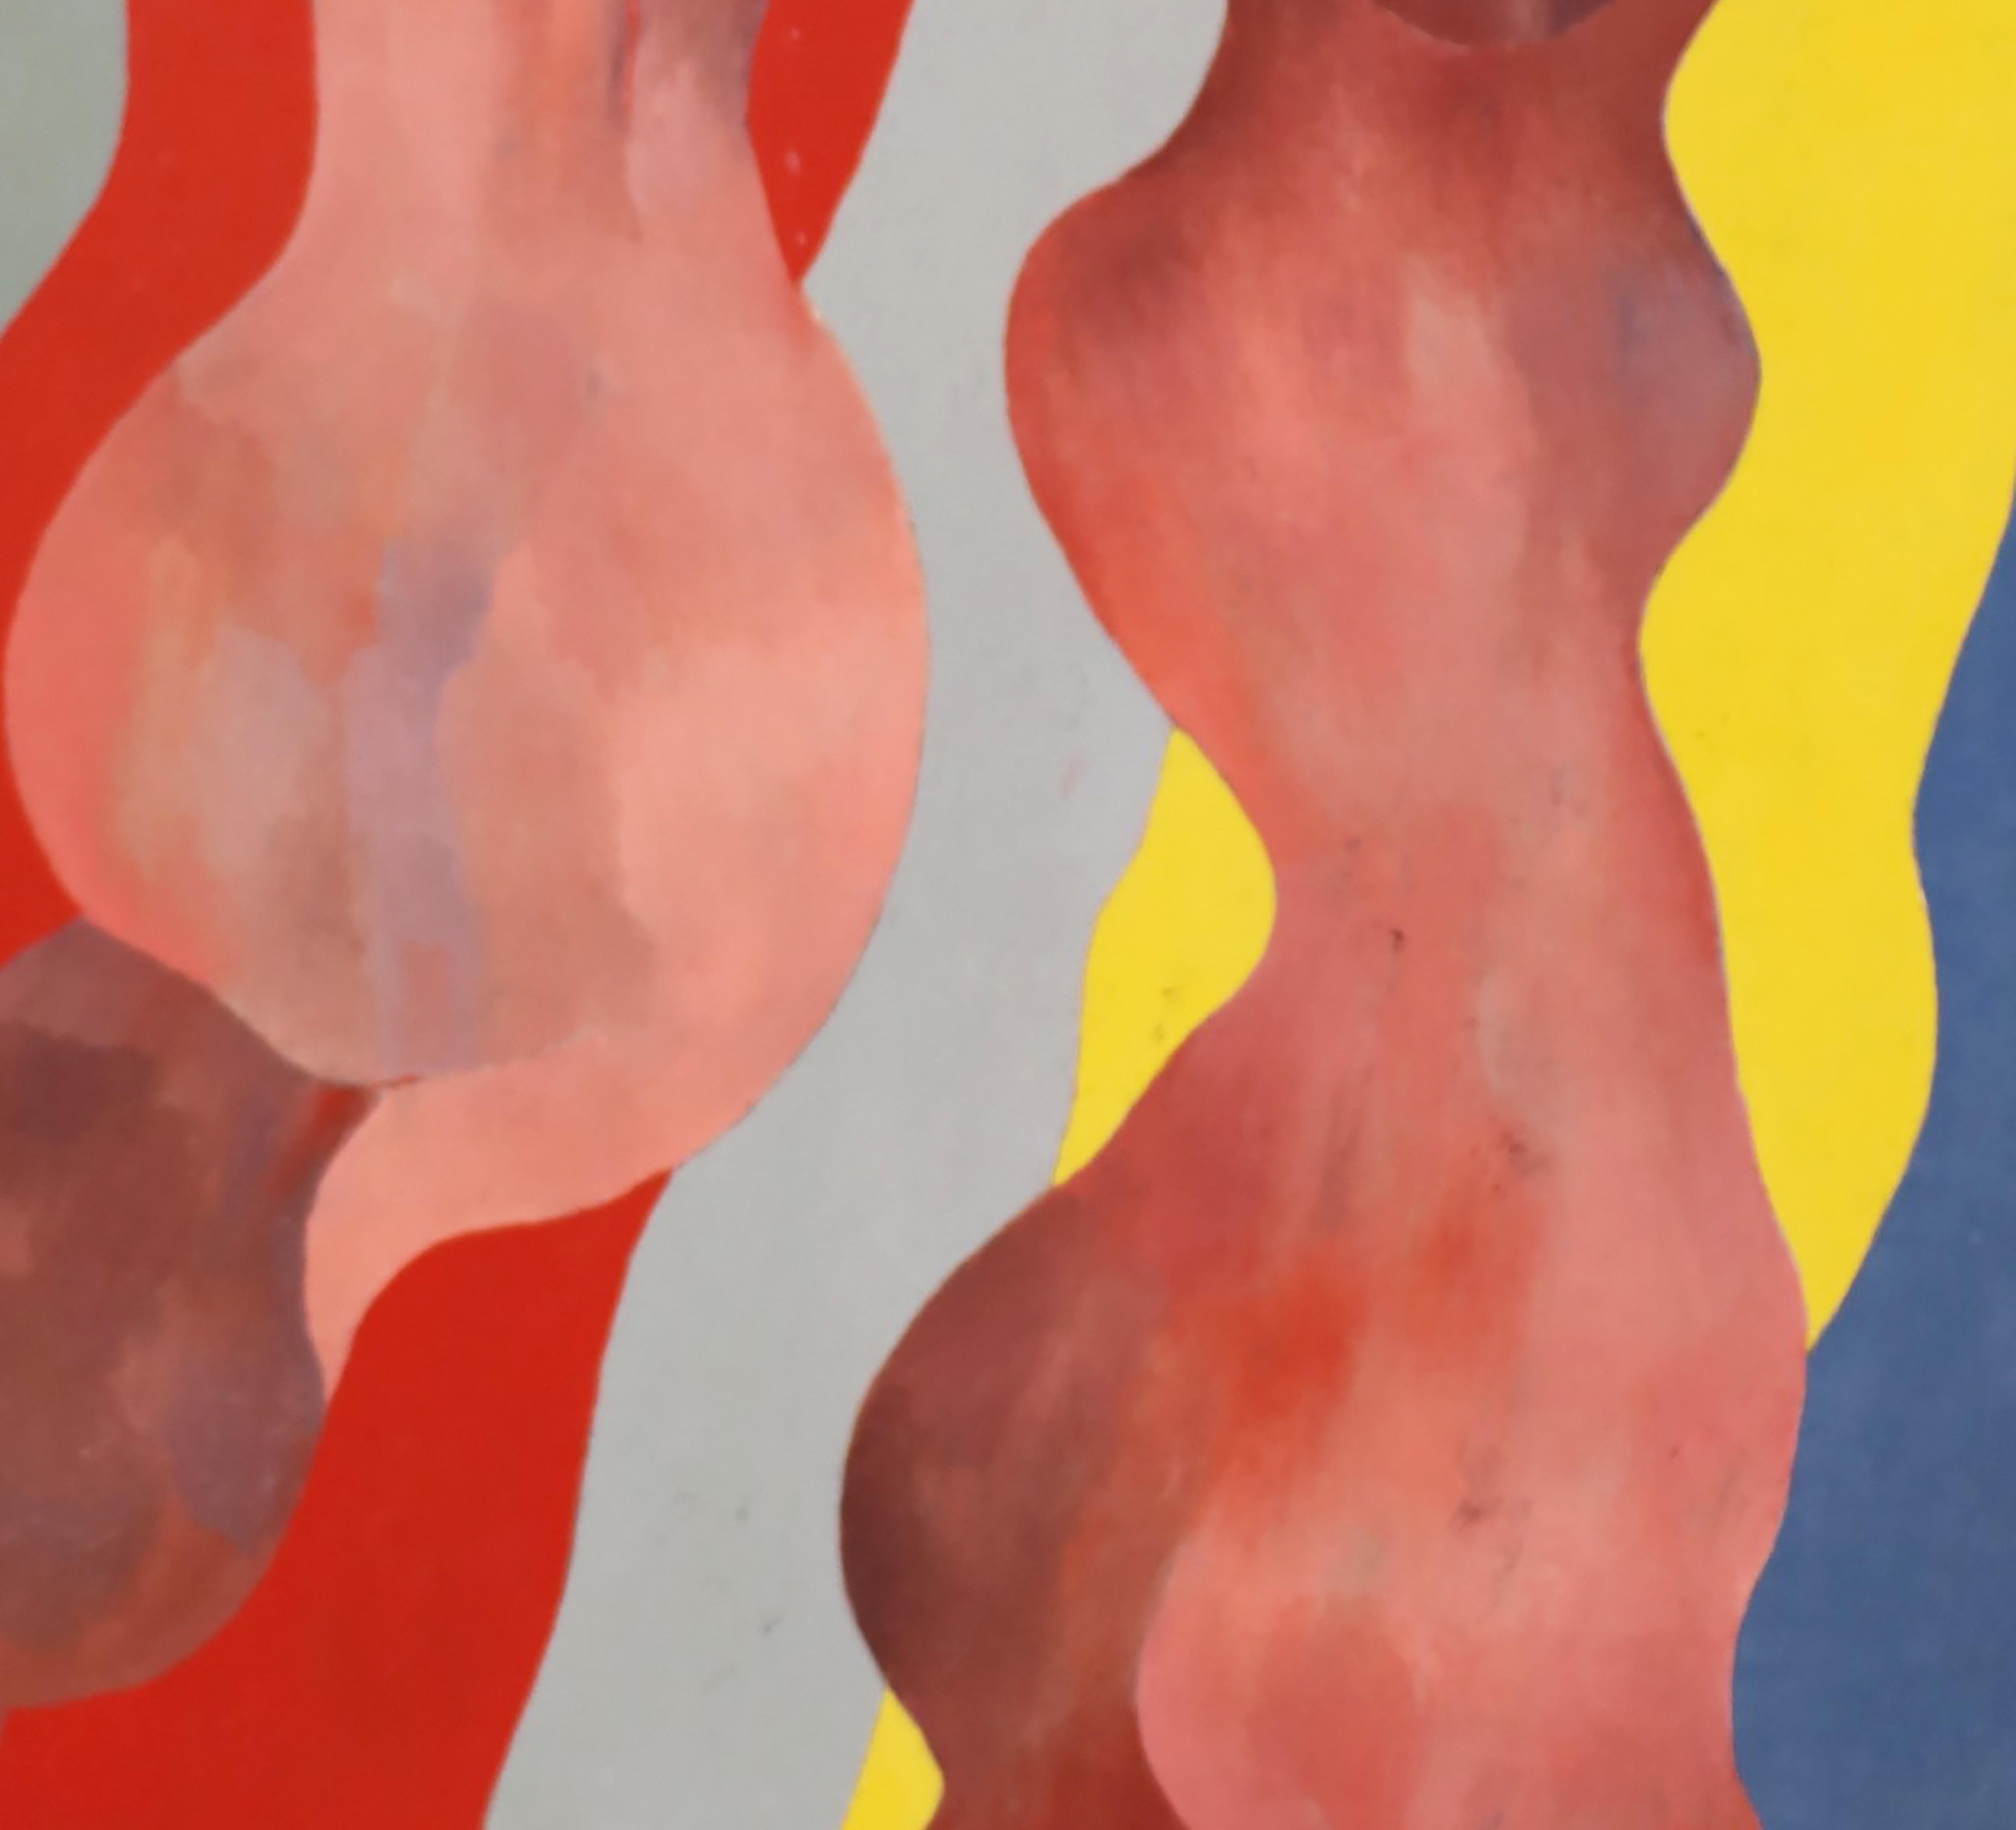 Dancing Figures on a Grey, Red, Yellow & Blue background. - Neo-Expressionist Painting by Jean Sanglar